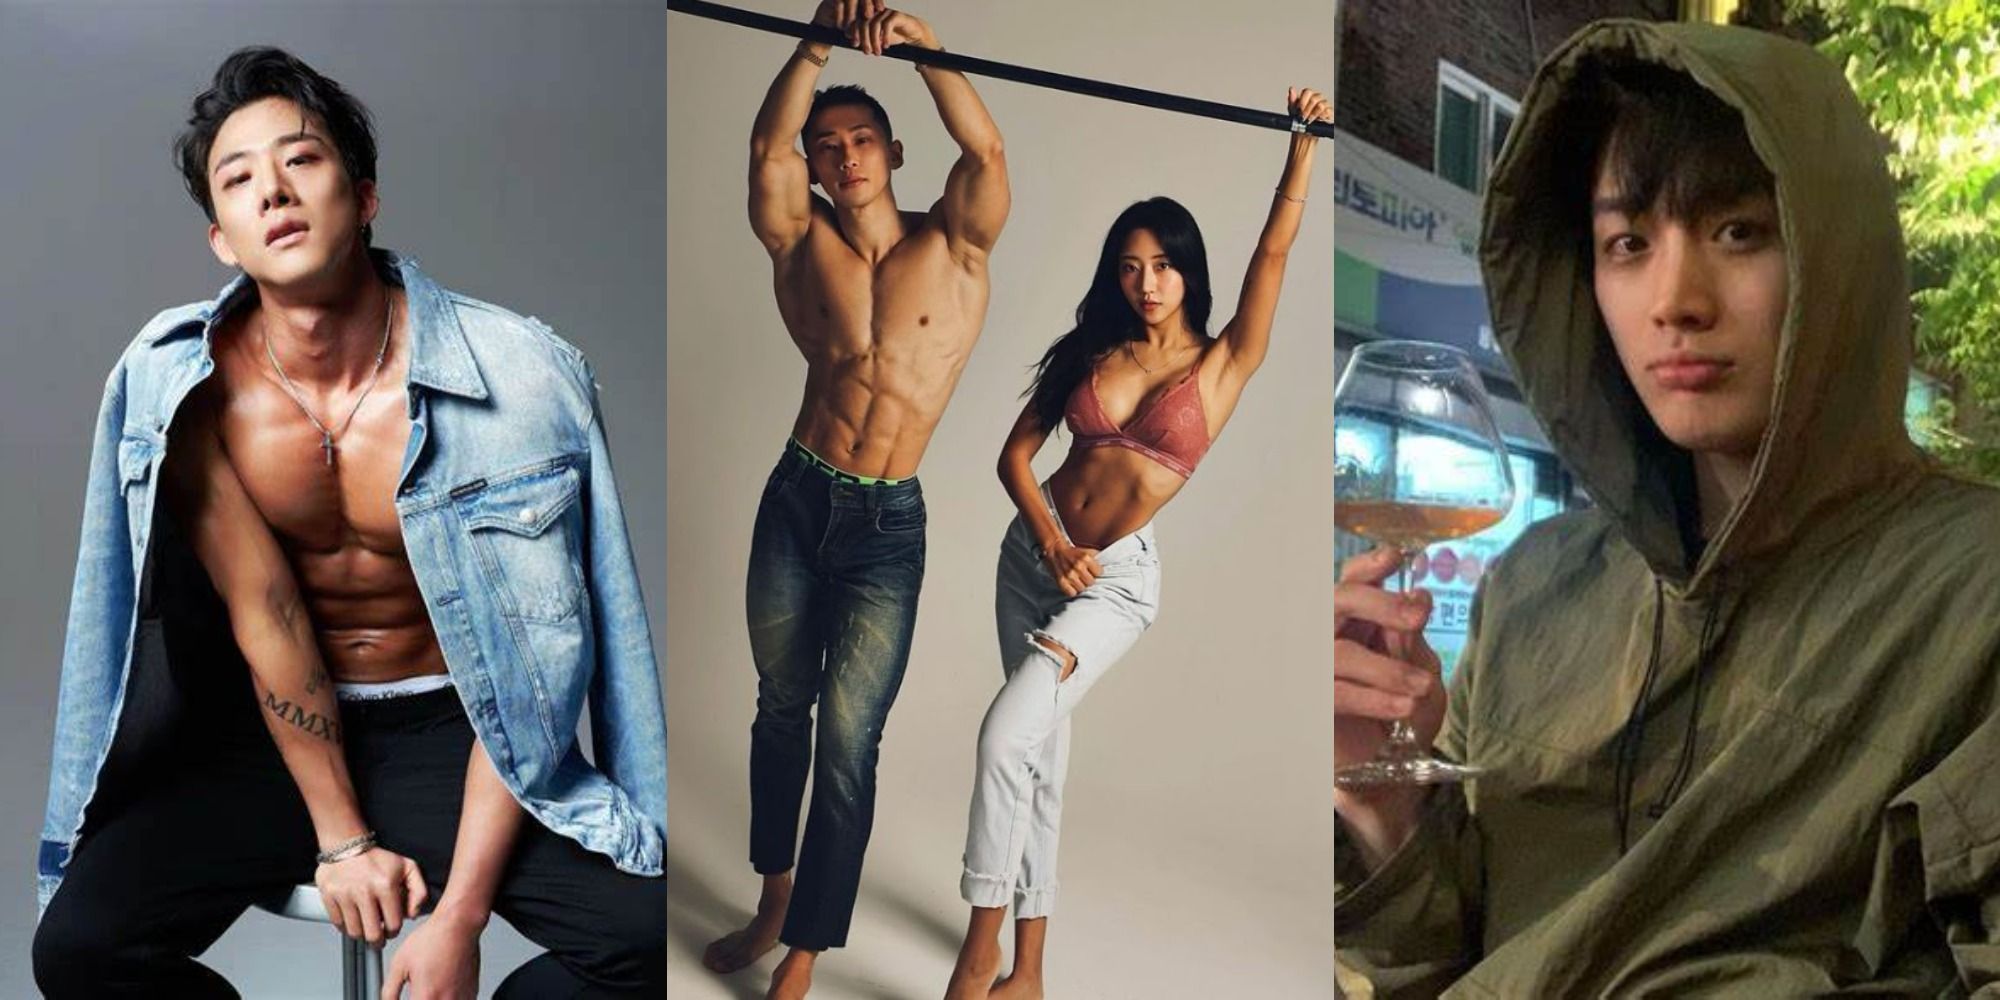 Where To Find The Cast of Korean Dating Show 'Single's Inferno' On